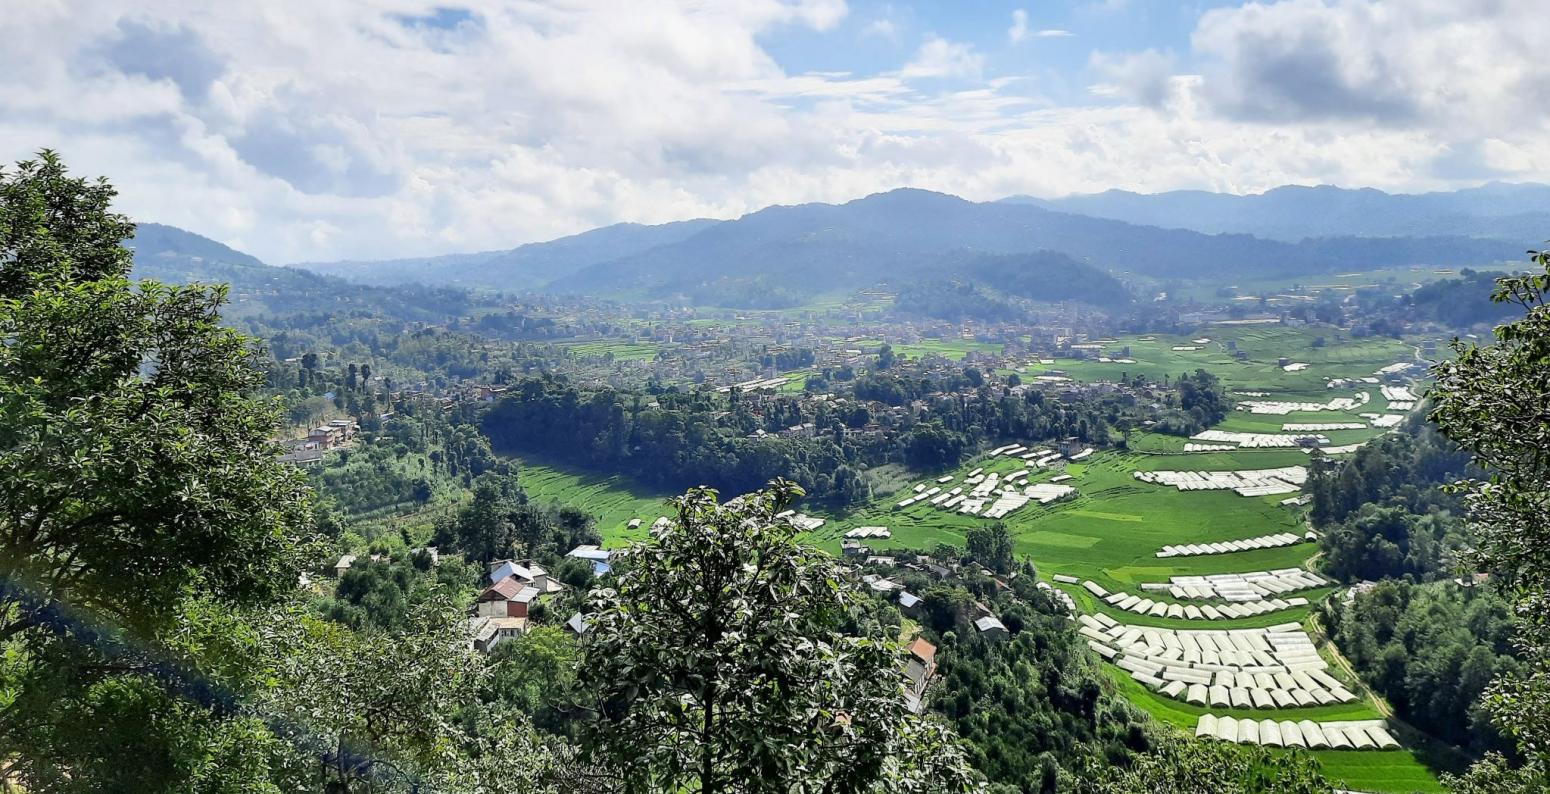 Pnaoramic view of a valley in Nepal